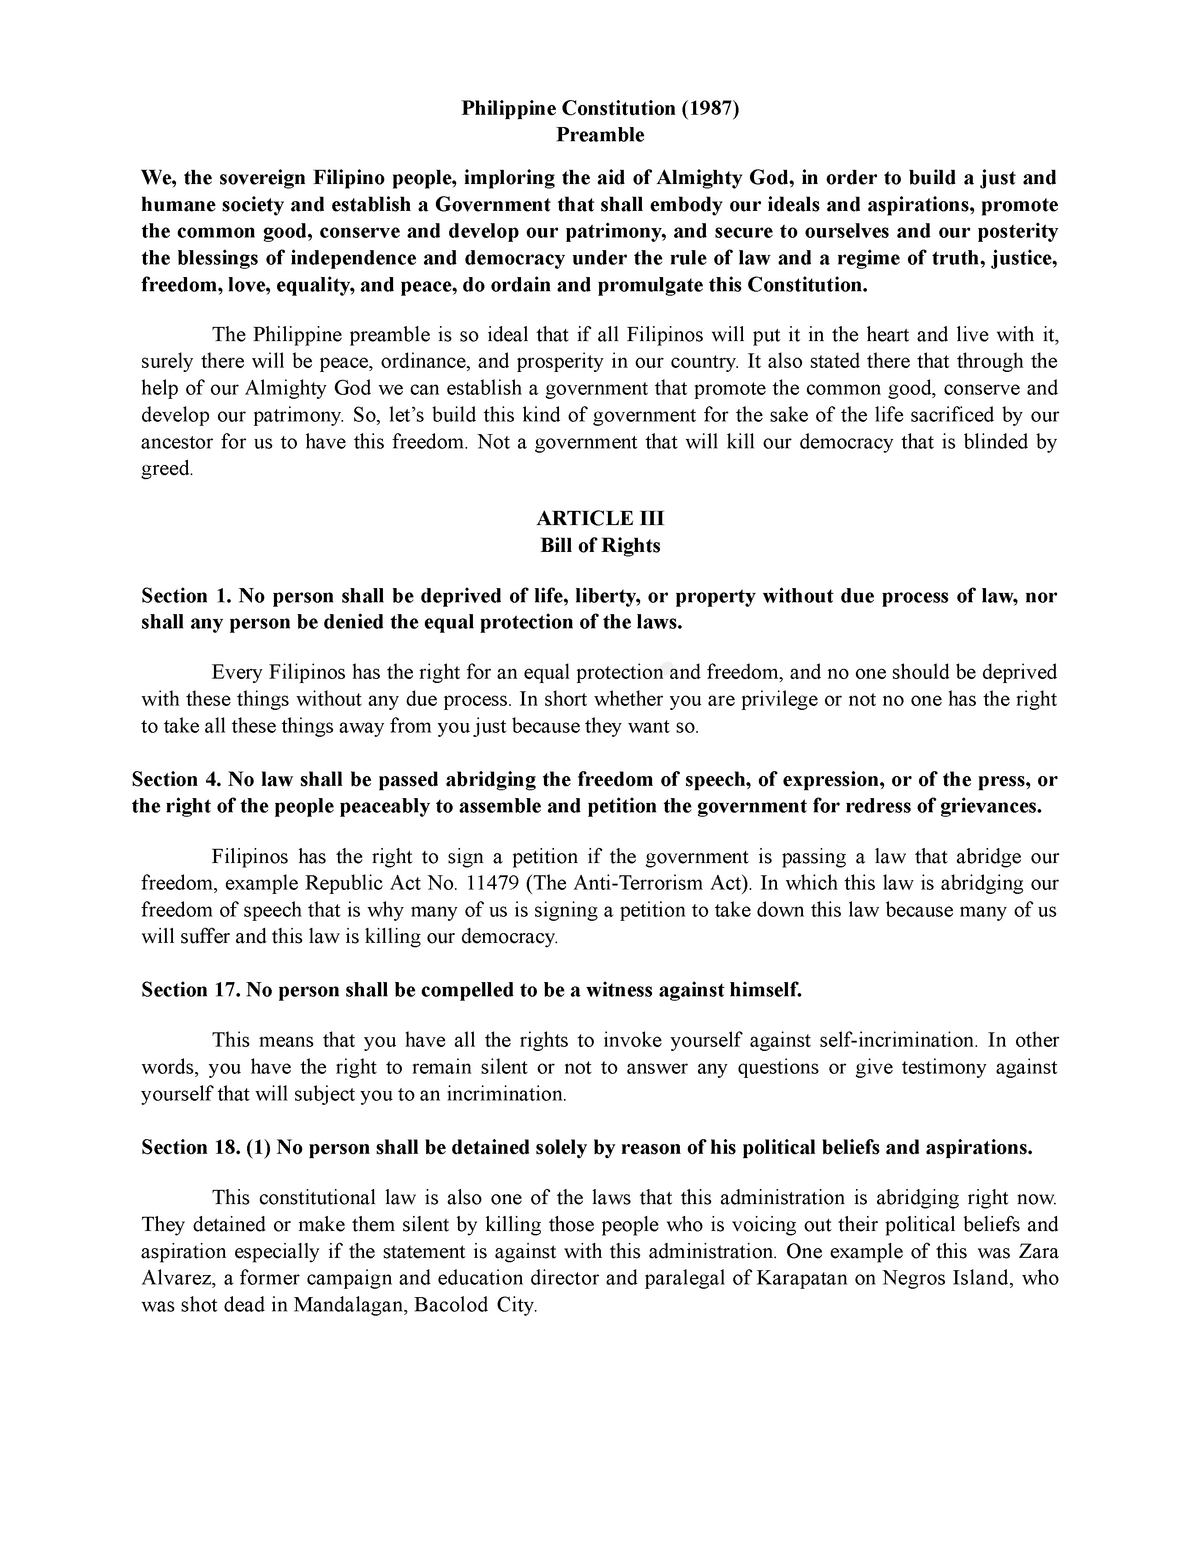 essay about 1987 philippine constitution article xiv